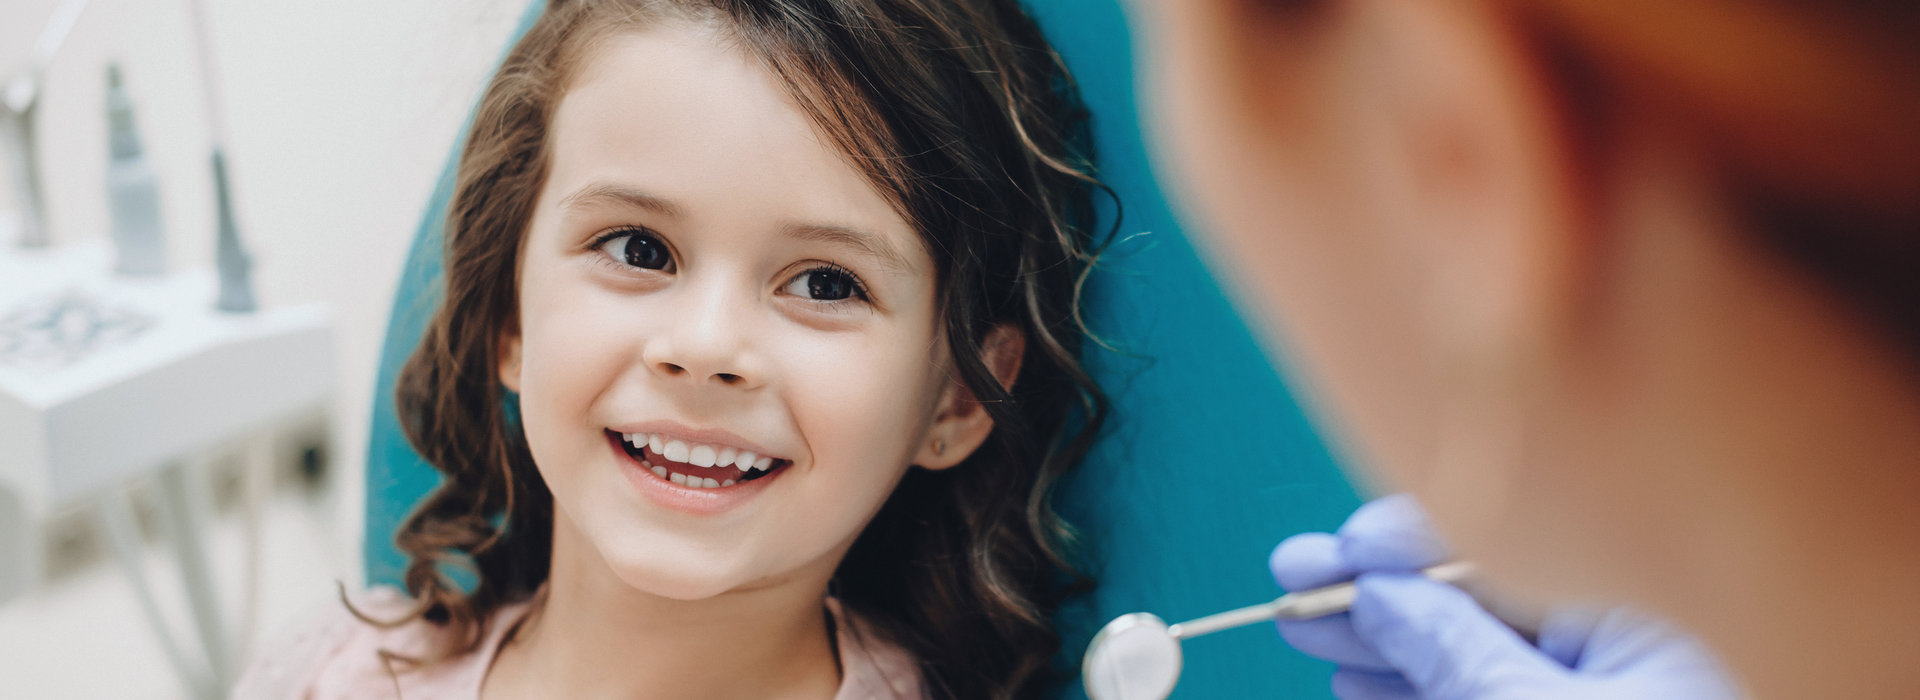 A child is smiling after Periodontal Care.